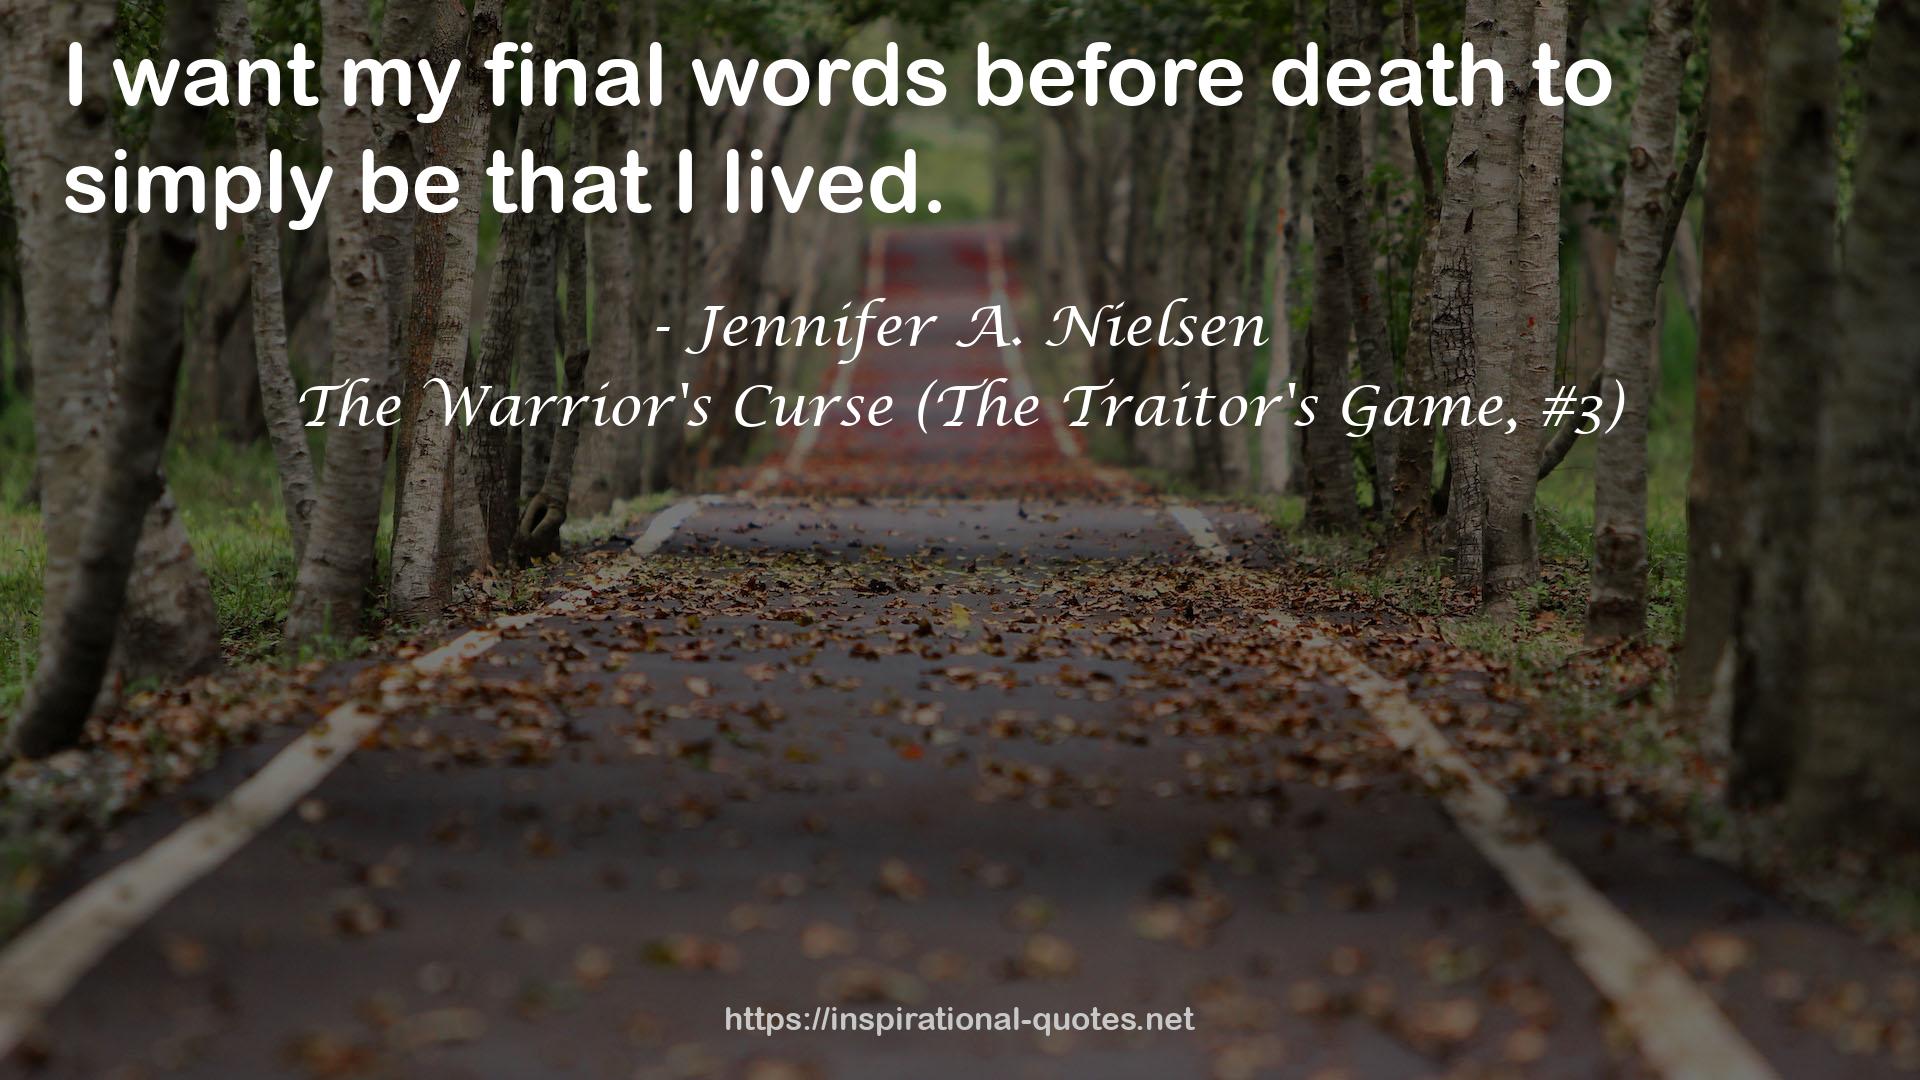 The Warrior's Curse (The Traitor's Game, #3) QUOTES